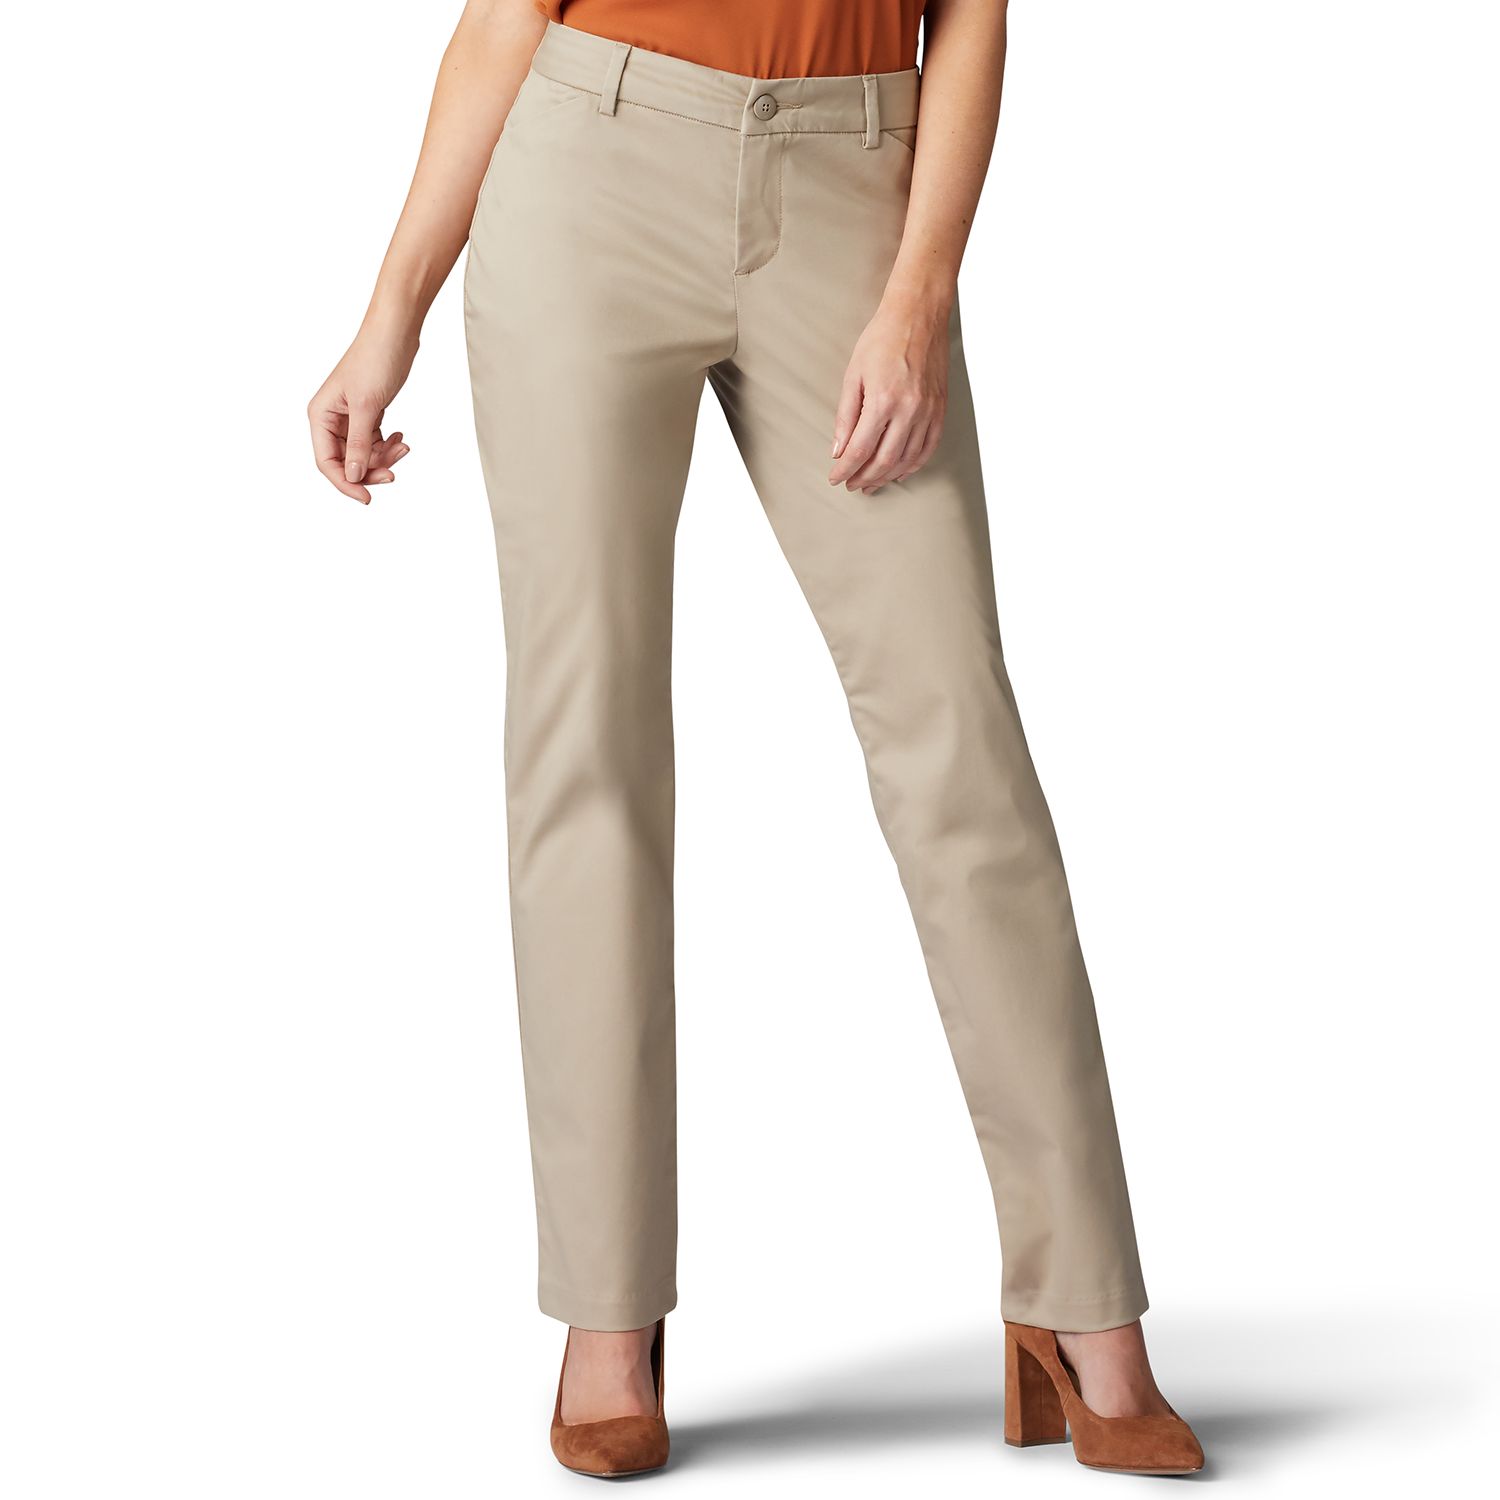 lee relaxed fit 1889 women's pants